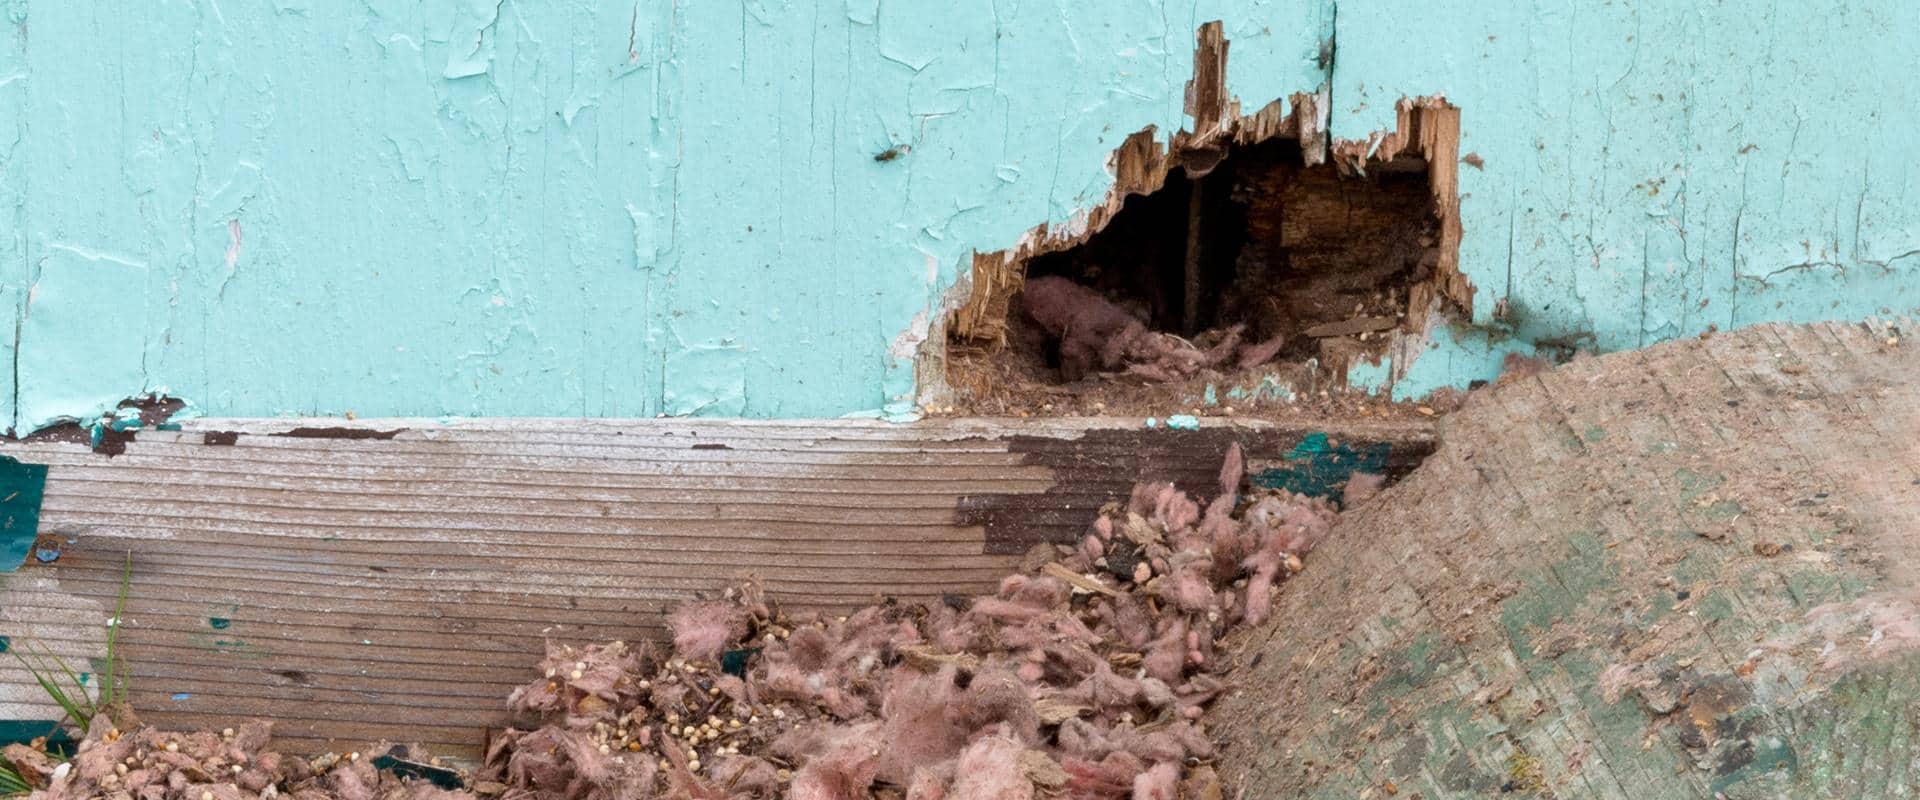 hole in washington home that mice enter